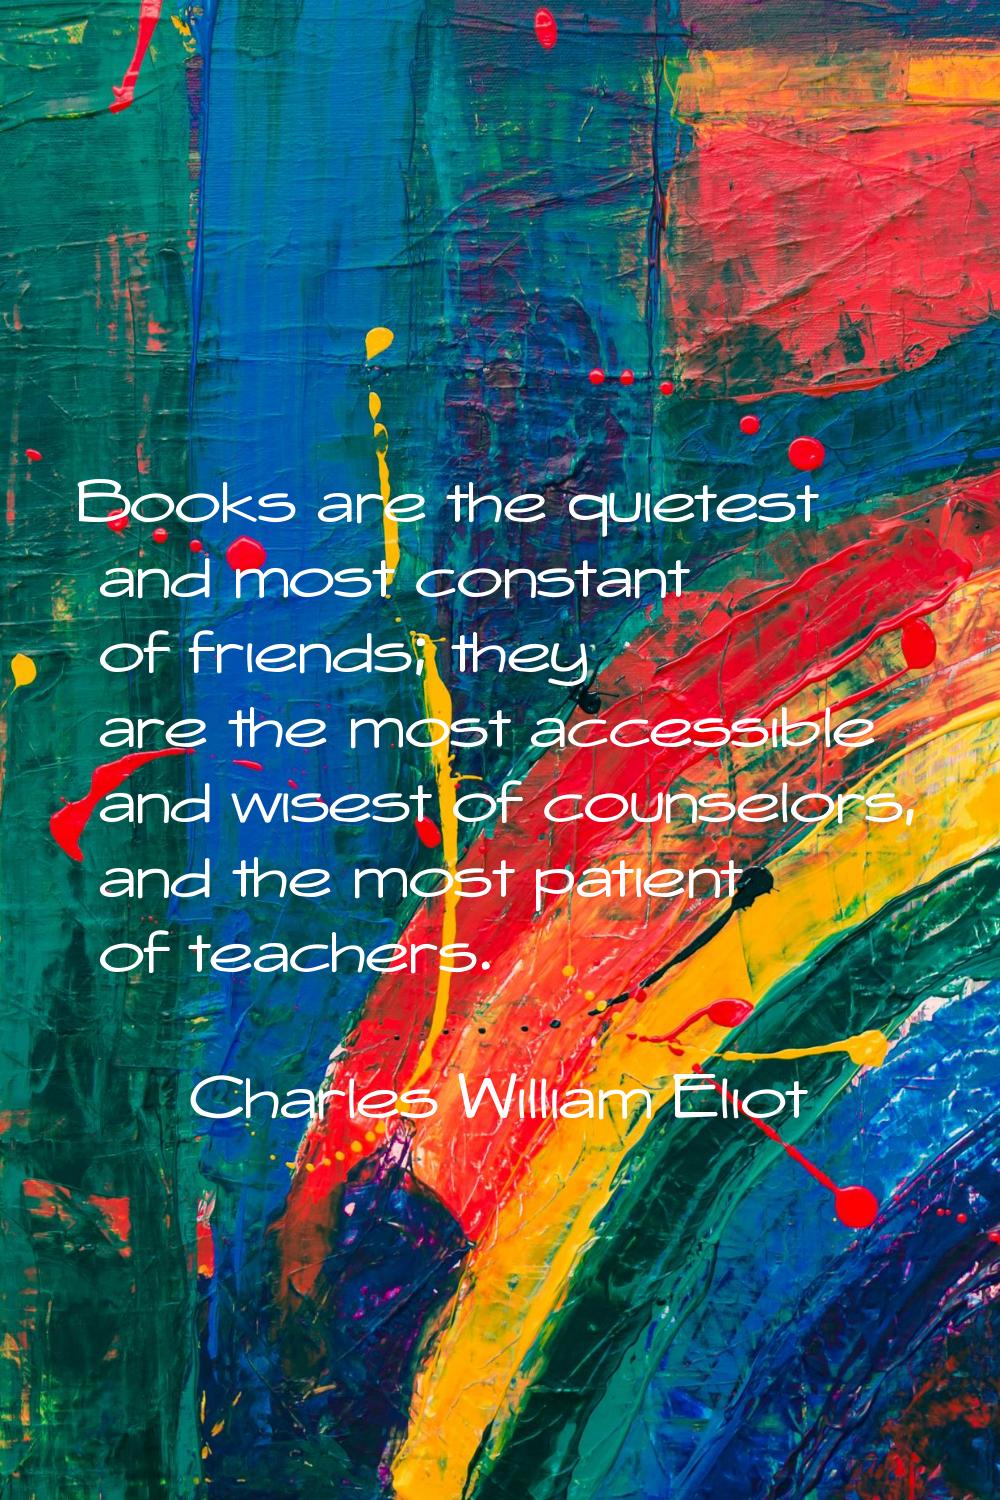 Books are the quietest and most constant of friends; they are the most accessible and wisest of cou